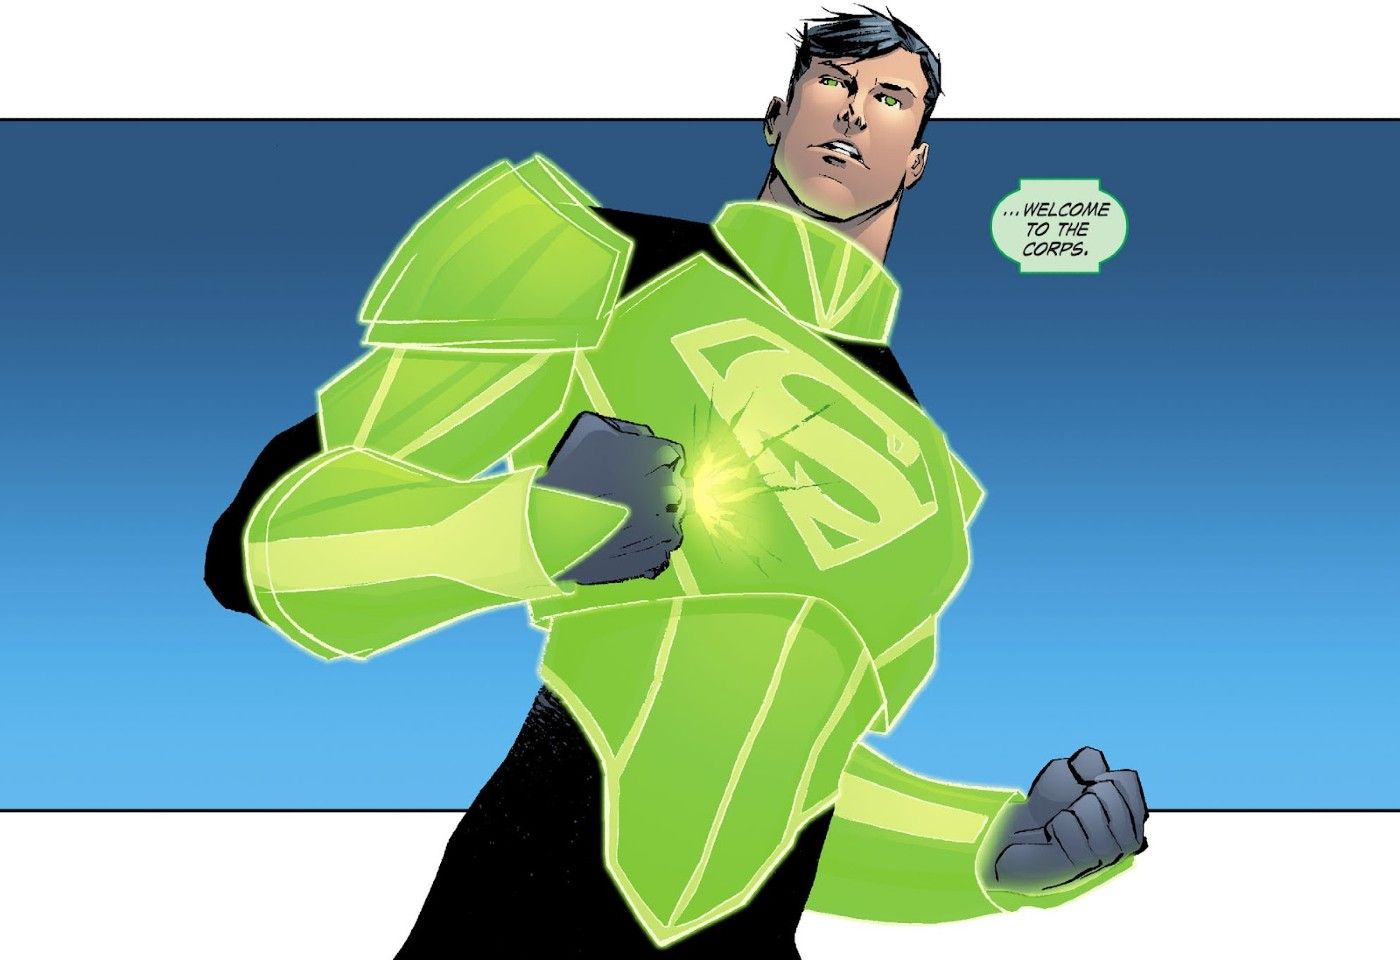 Smallville Finally Gave Fans the Green Lantern Superman They’d Always Wanted